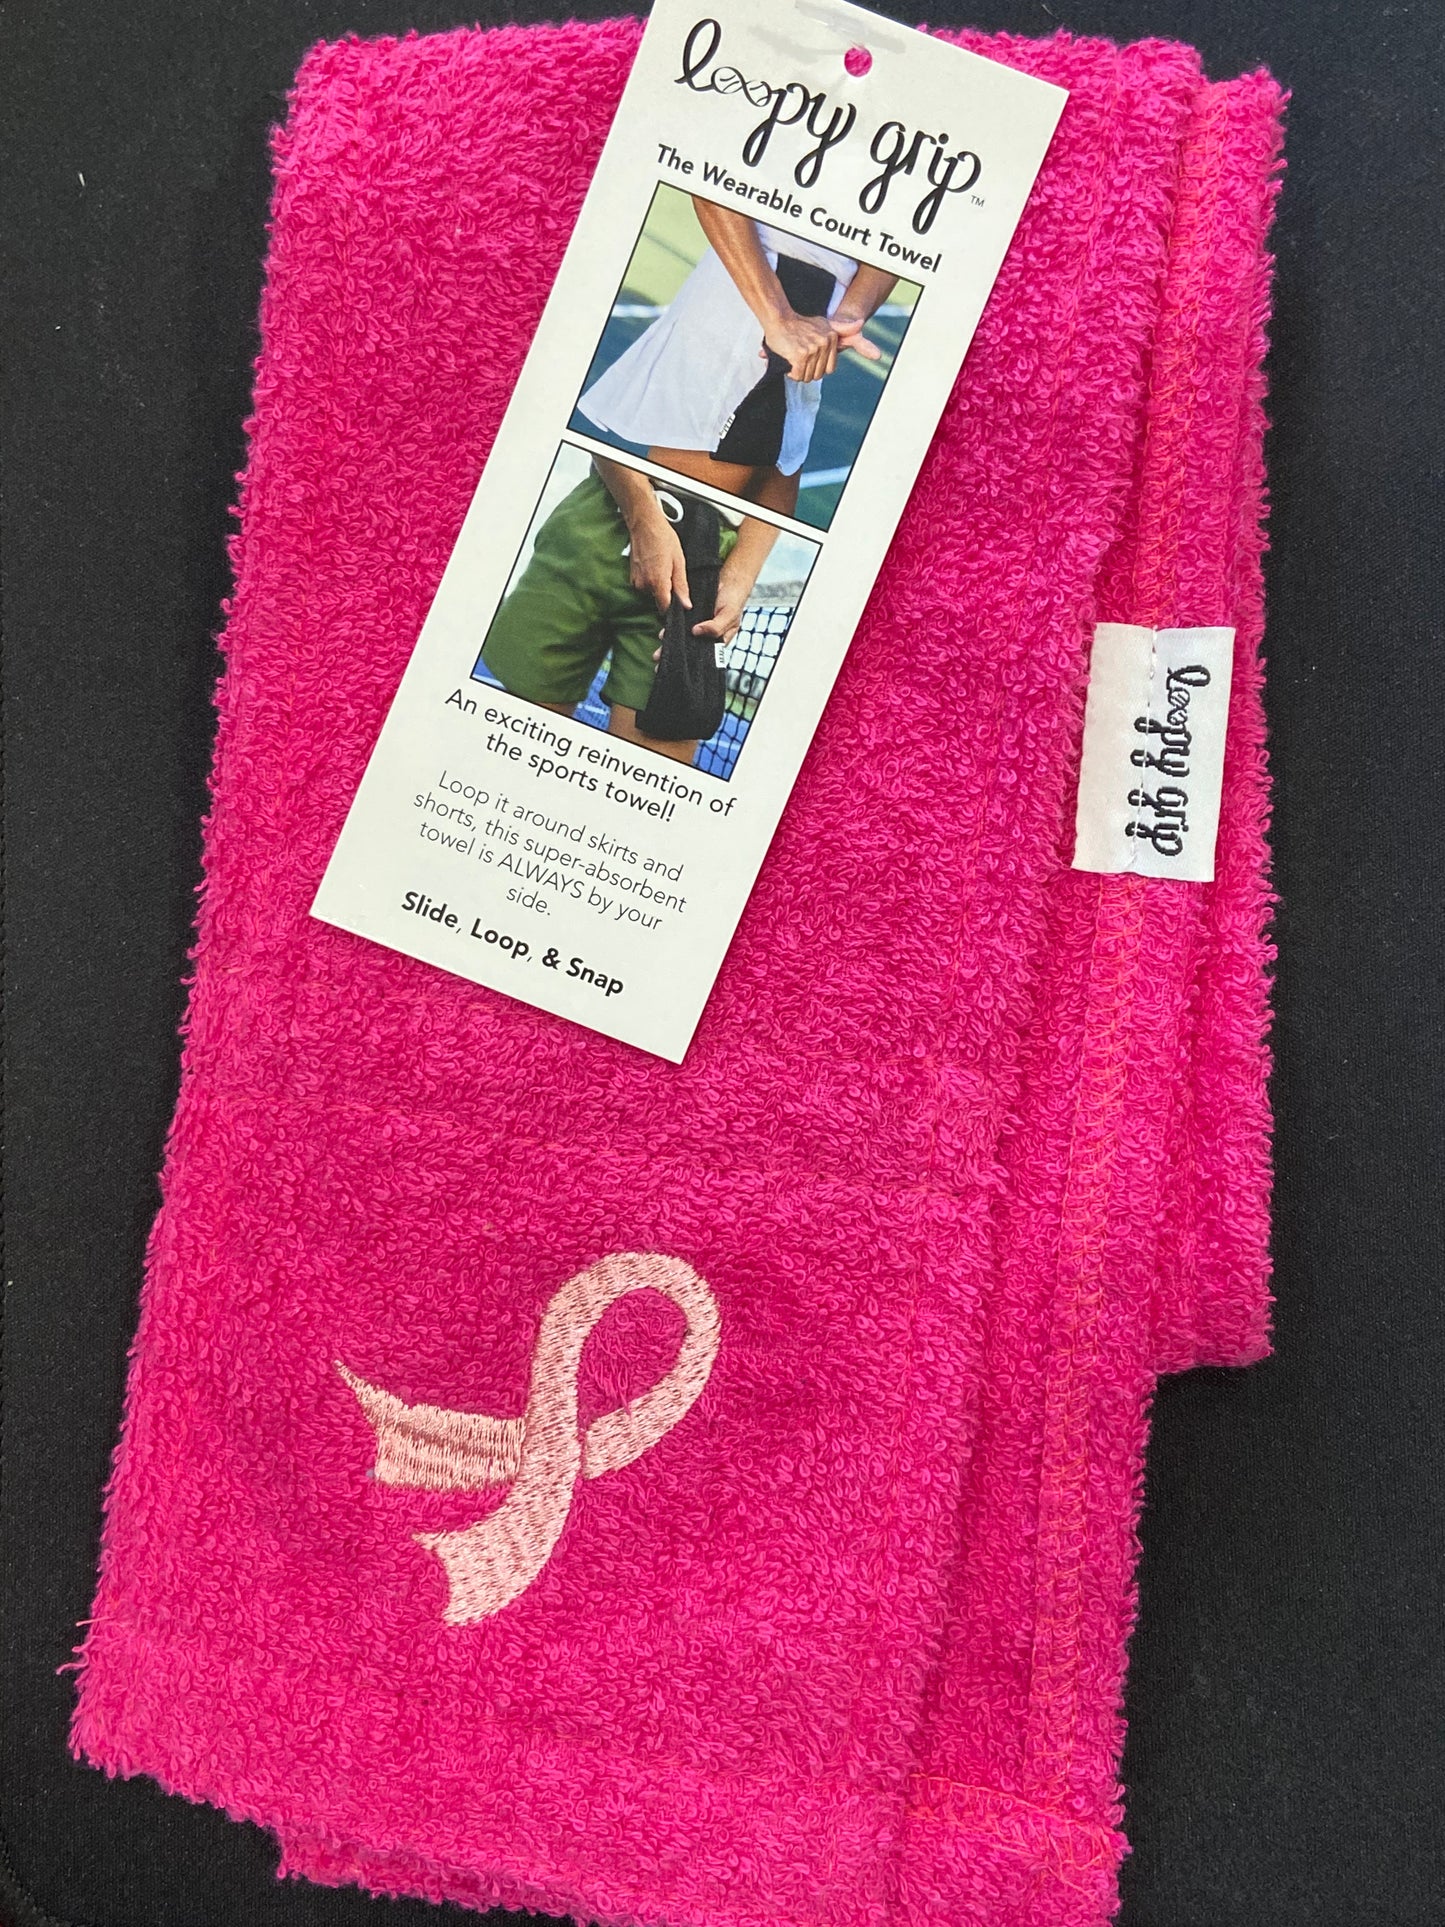 Breast Cancer Awareness - Wearable Court Towel